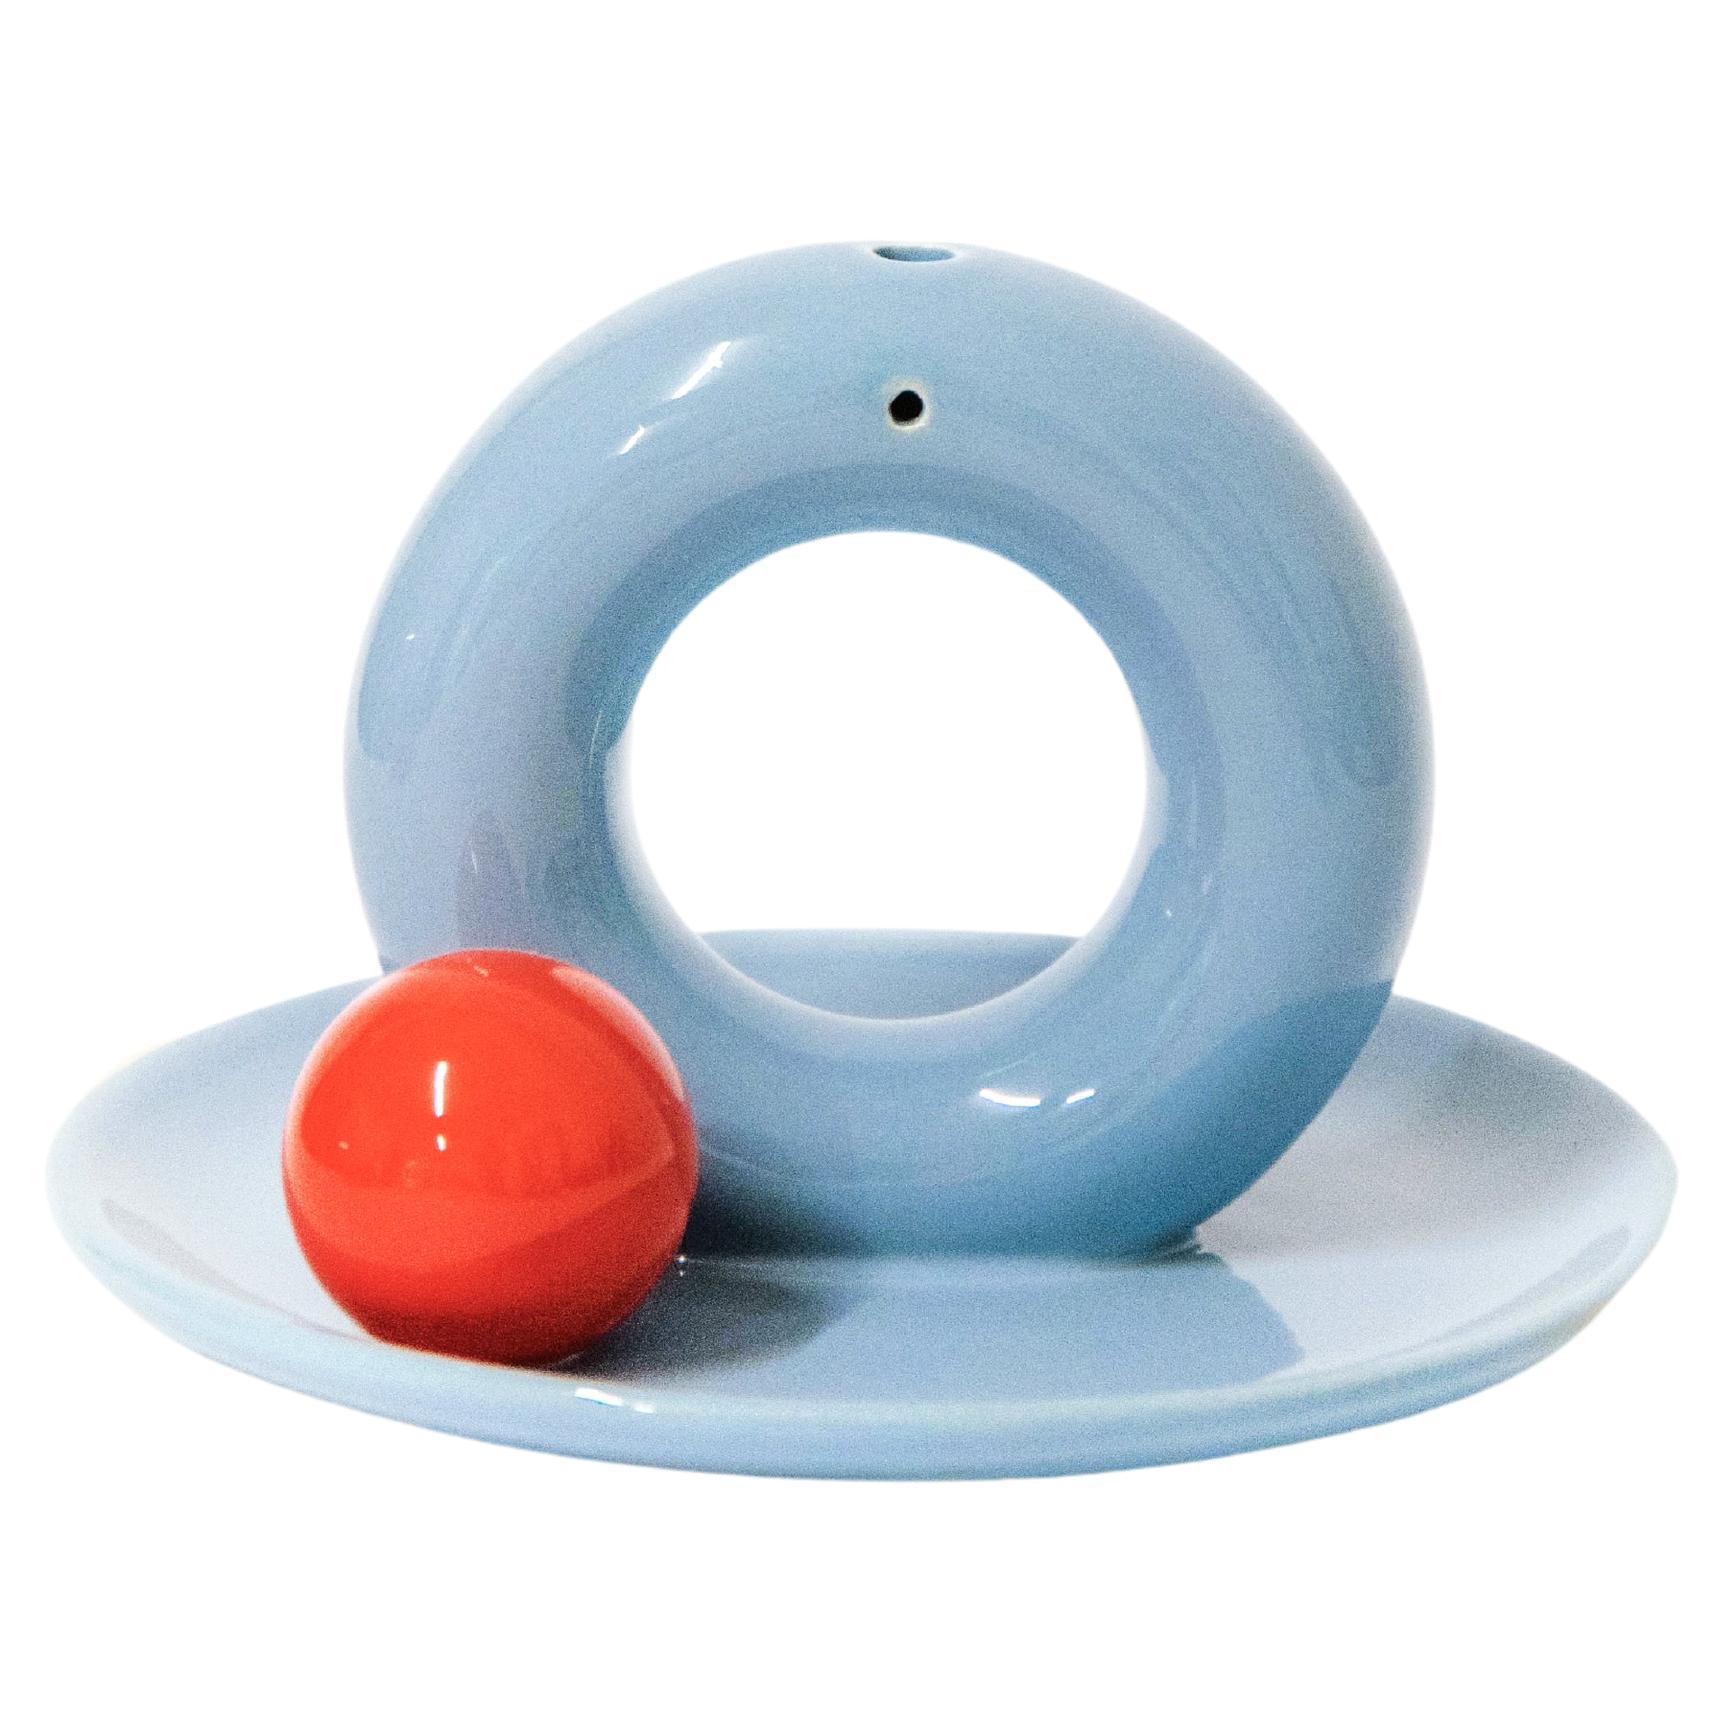 Aniela MINI is the answer to the need for a small item - a coaster that can be used to hold jewelry, sweets or burn incense sticks.


Black platter
Ecru ball

ø 15 cm
two holes for incense 